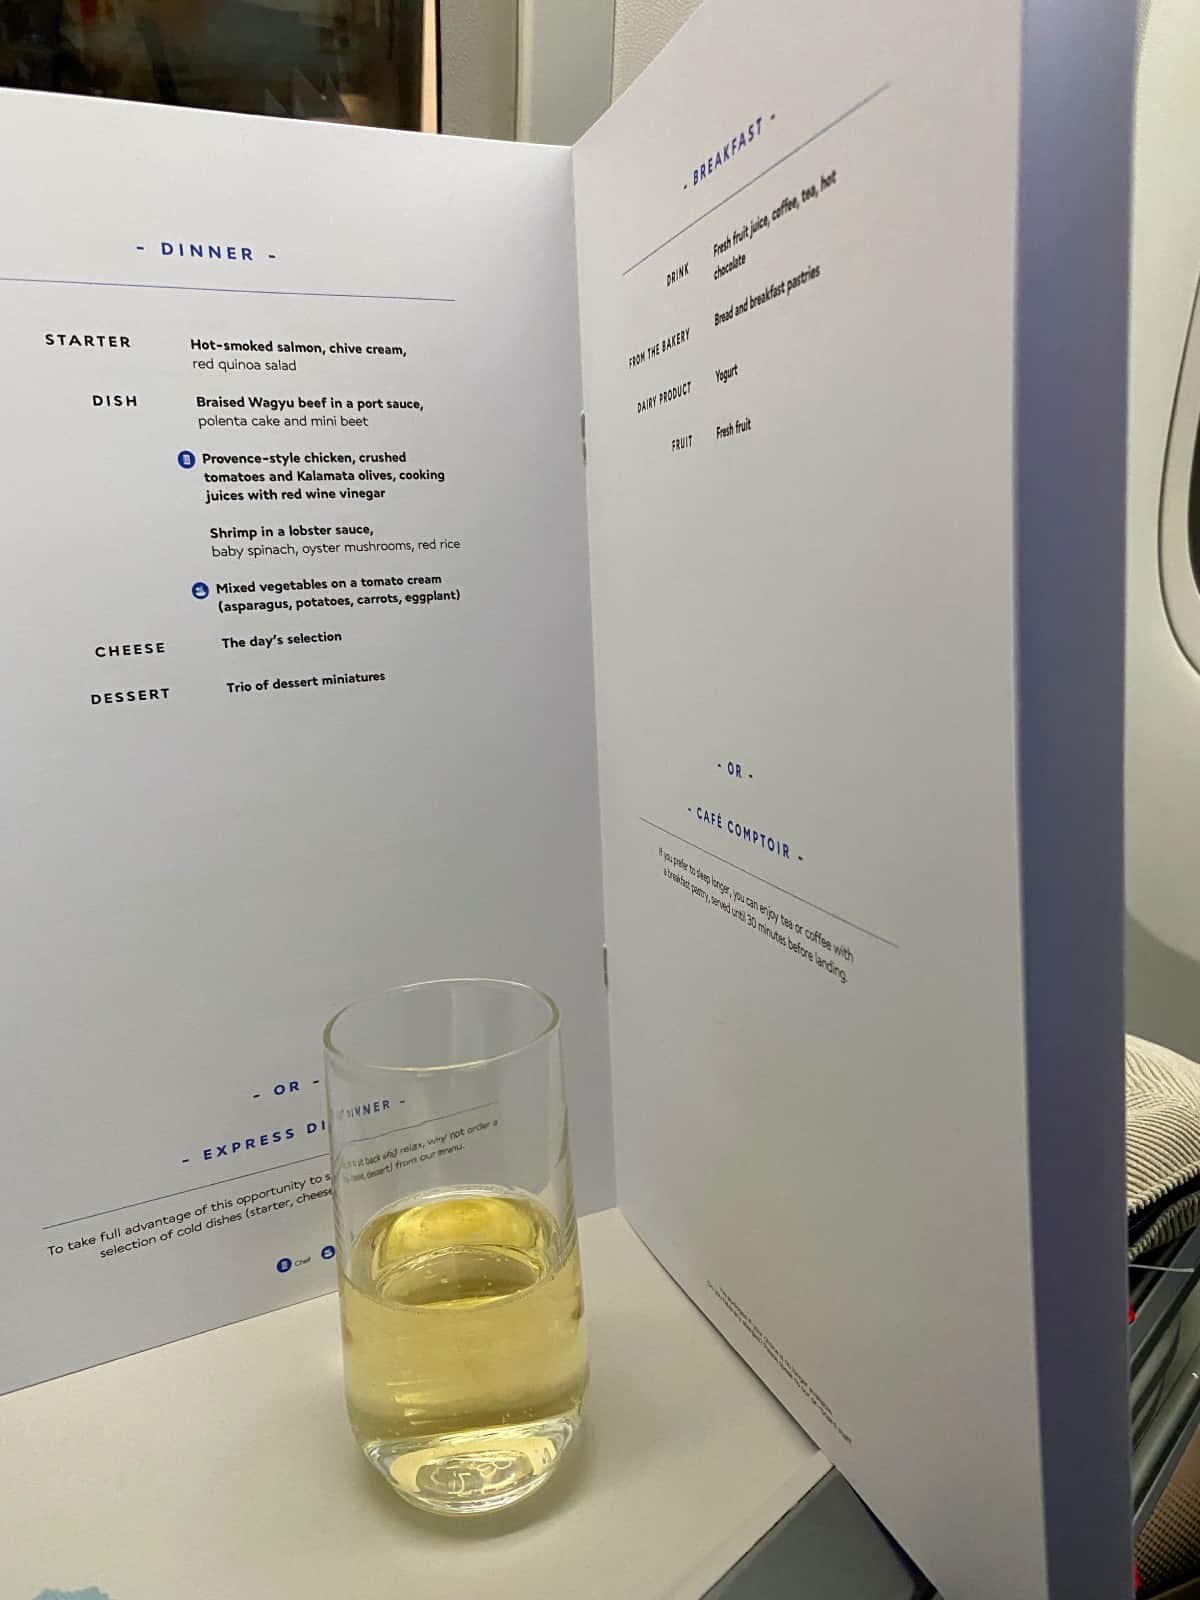 The AirFrance business class dinner menu - DTW>CDG